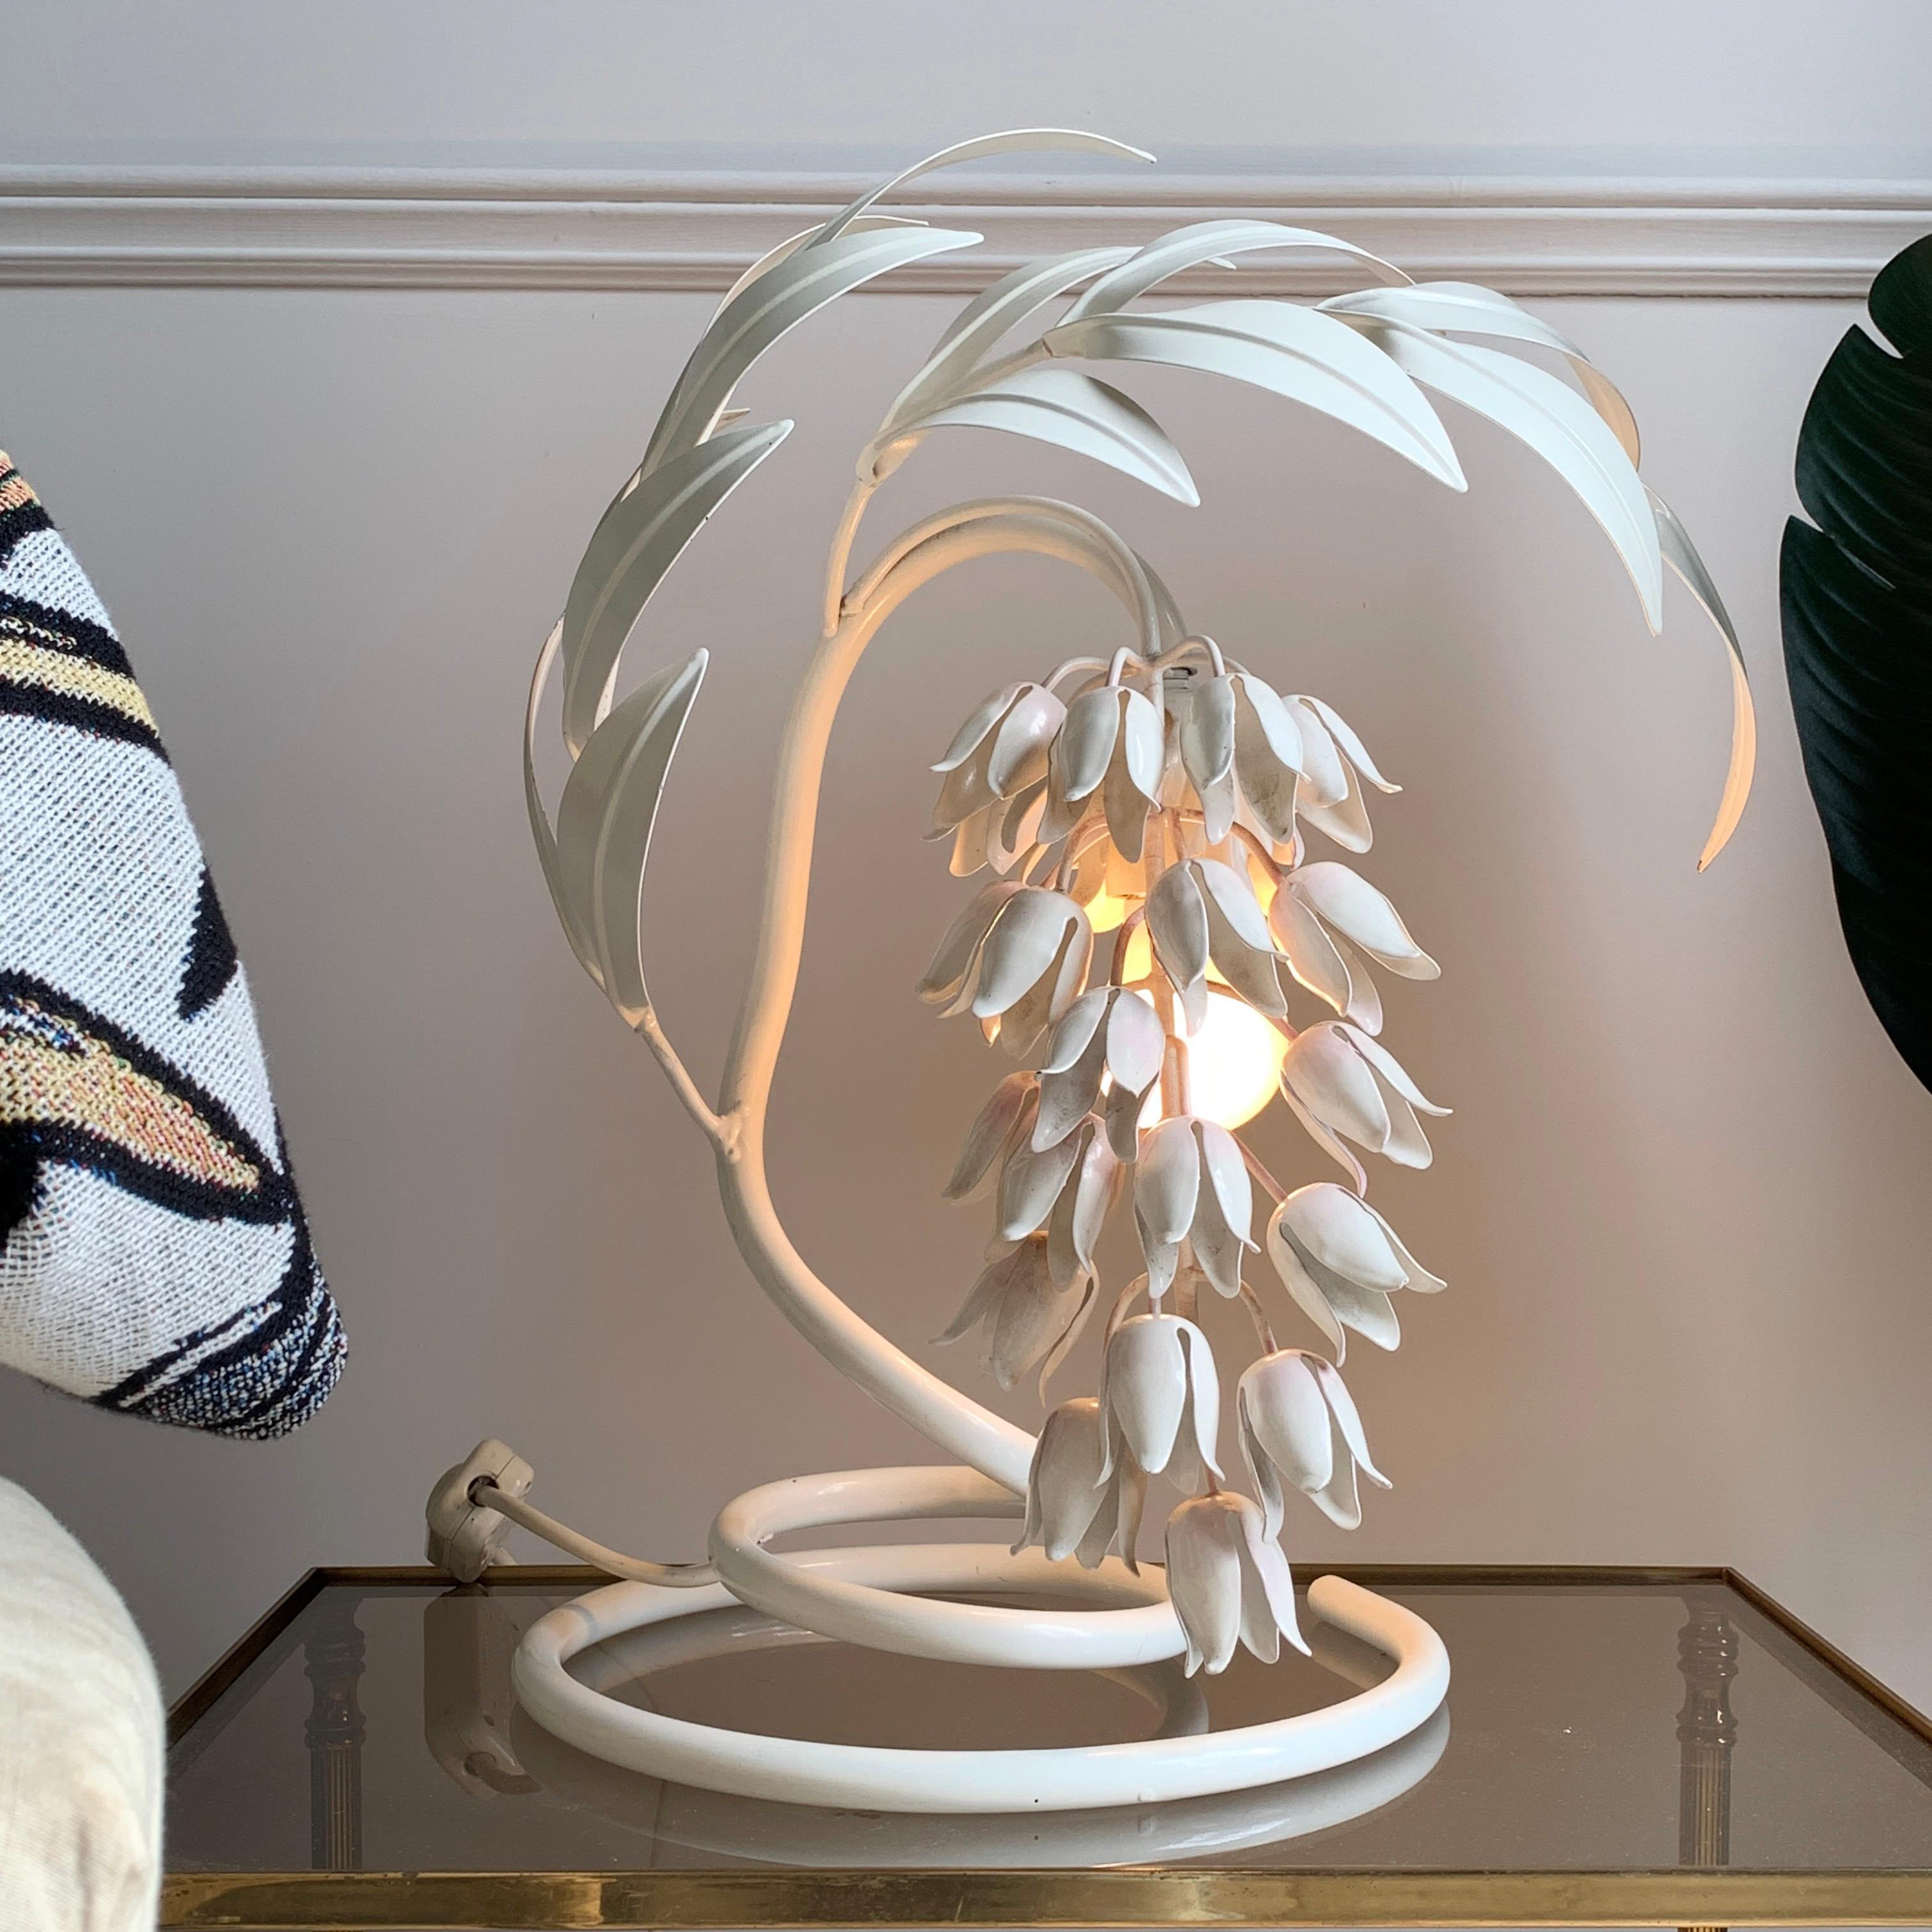 In superb original condition this table lamp by Hans Kogl is a wonderful example of his ability to draw inspiration from the natural world and incorporate it into high end interior pieces.

Entirely in white, with a wonderful light pink accent to